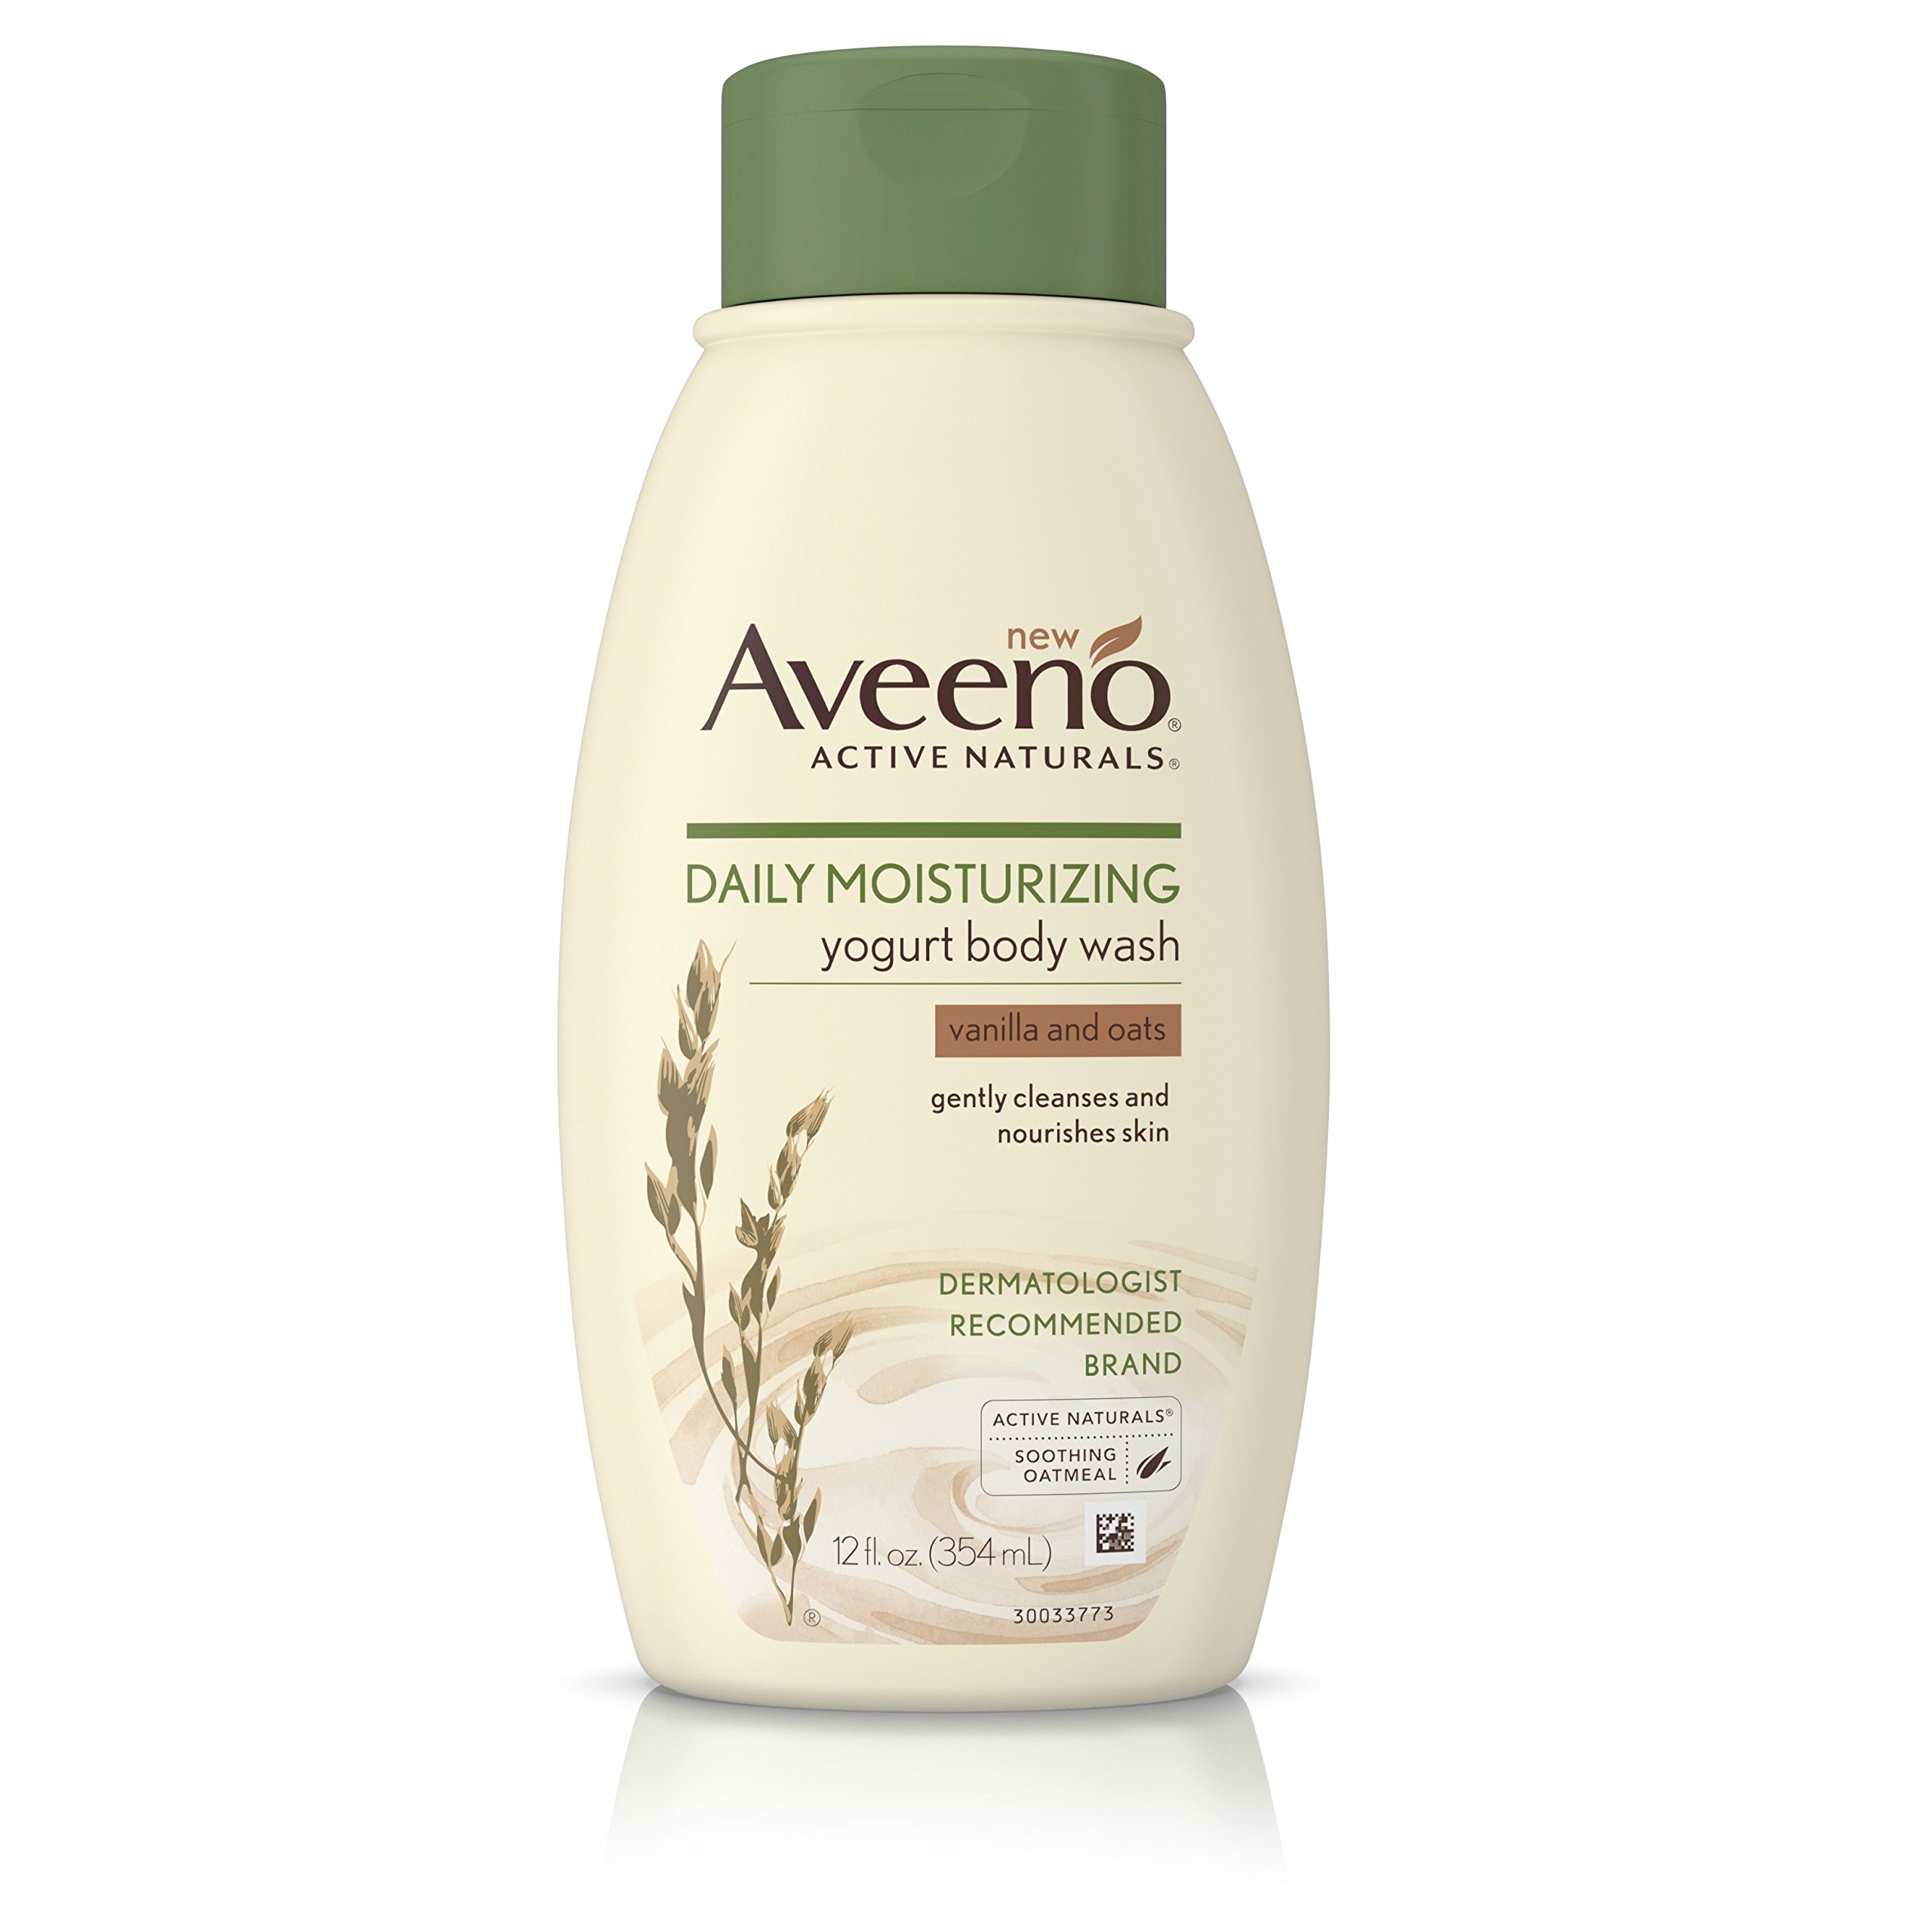 Aveeno Daily Moisturizing Yogurt Body Wash for Dry Skin with Soothing Oat & Vanilla Scent, Gentle Body Cleanser, 12 fl. oz (Pack of 3)